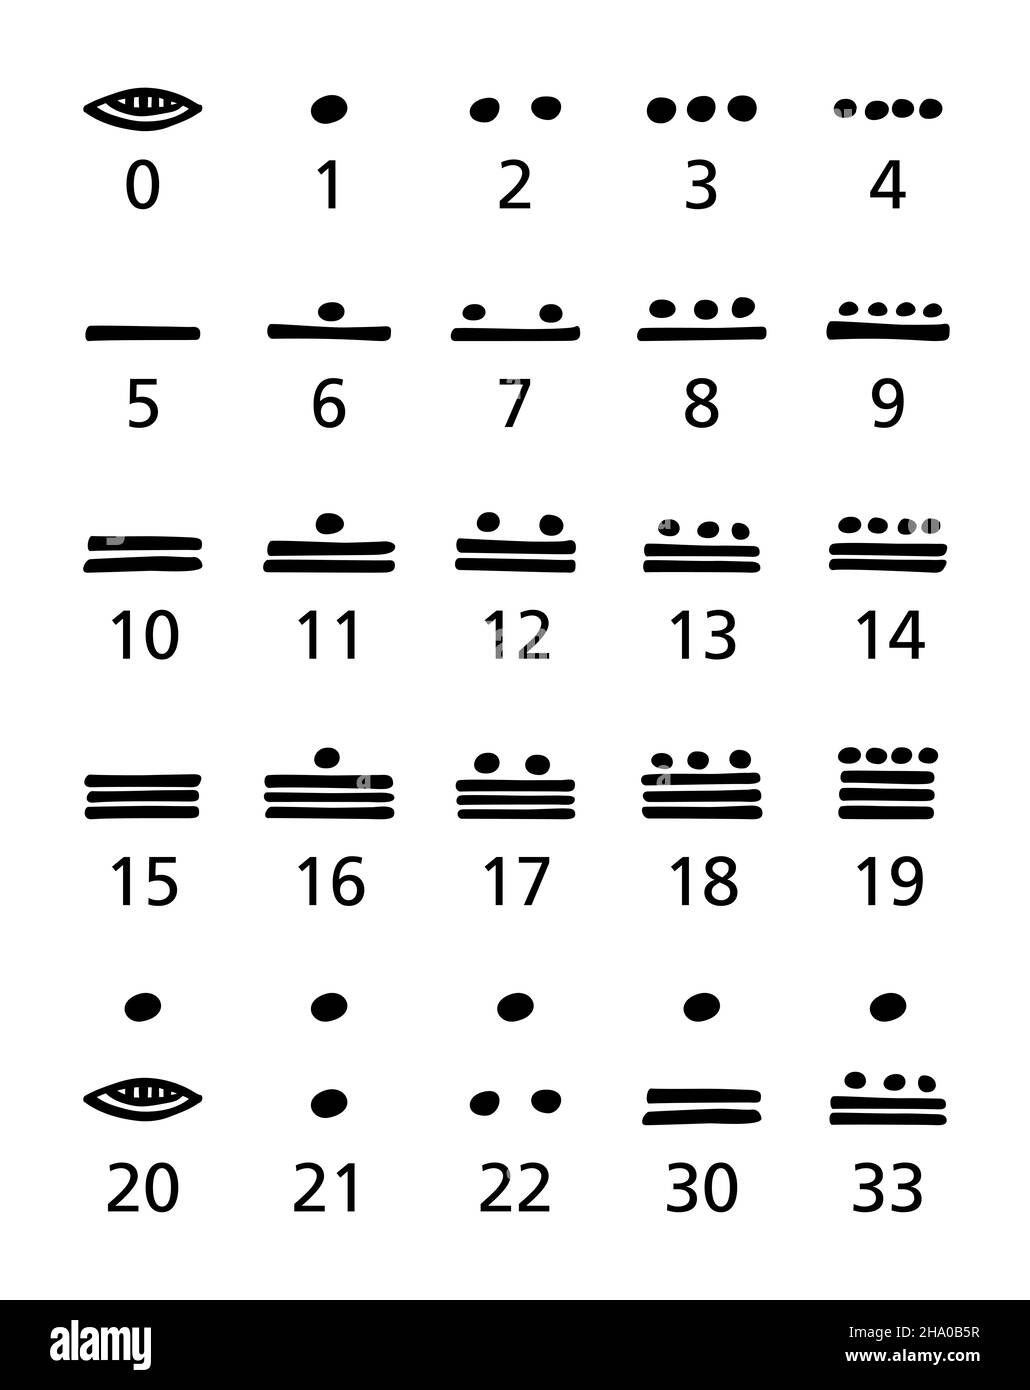 Maya numerals, black and white. Vigesimal, twenty-based Mayan numeral system for representing numbers and calendar dates in Maya civilization. Stock Photo